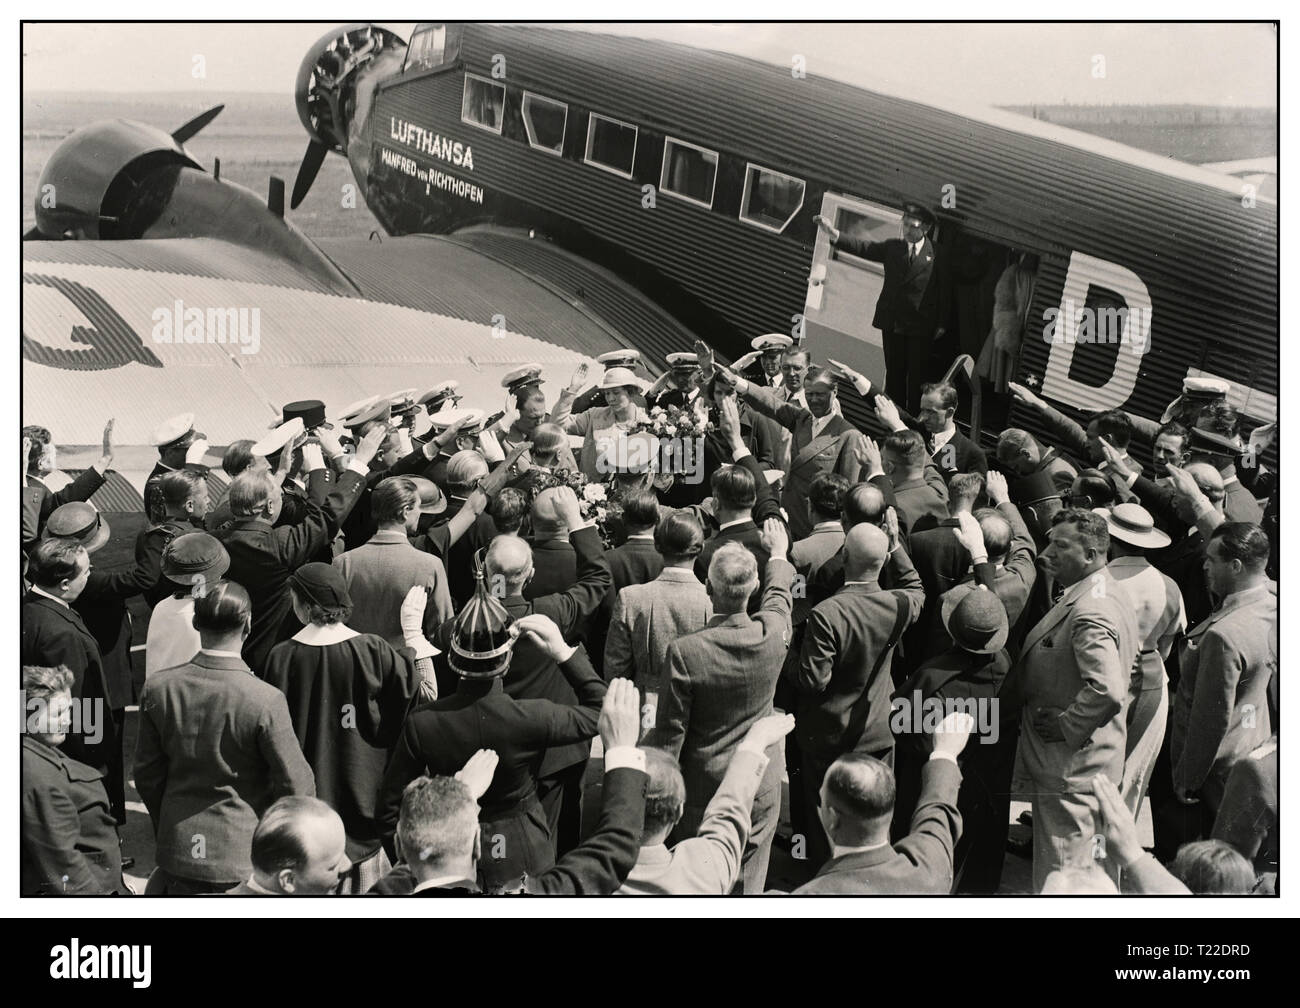 Vintage 1930's pre-war B&W image of Hermann Göring leading German Nazi and head of the German Luftwaffe arriving in Hungary 'Mátyásföldön' in a German Junkers Ju 52 with 'Lufthansa' insignia on fuselage Crowd greet him with Heil Hitler salutes 1935 Stock Photo